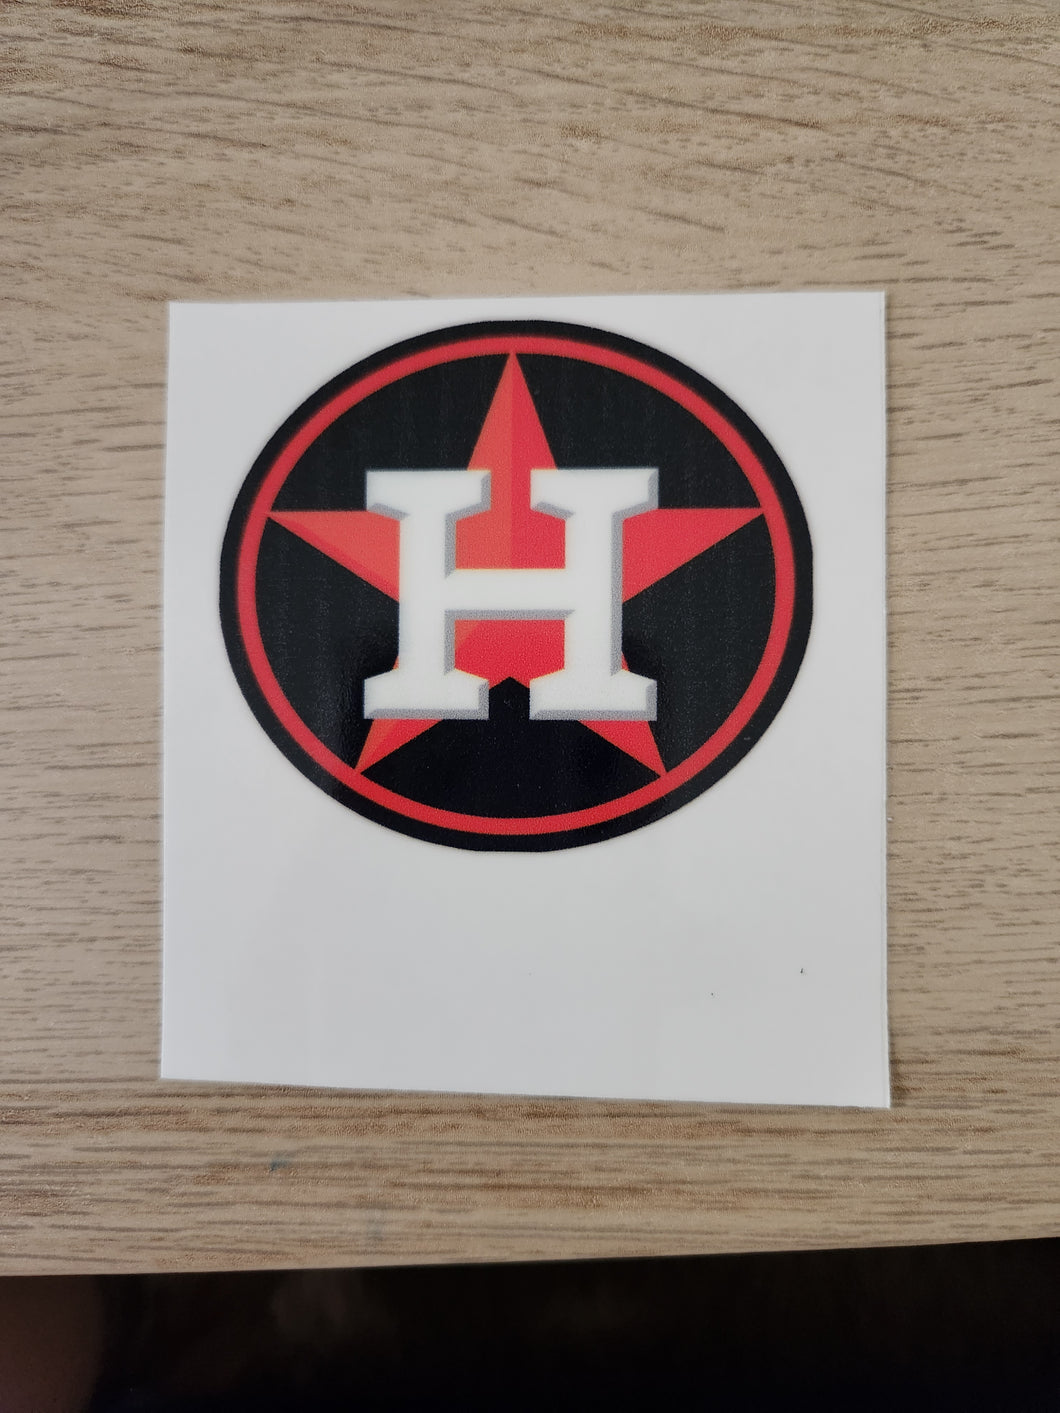 Astro star 3x2.5 decal